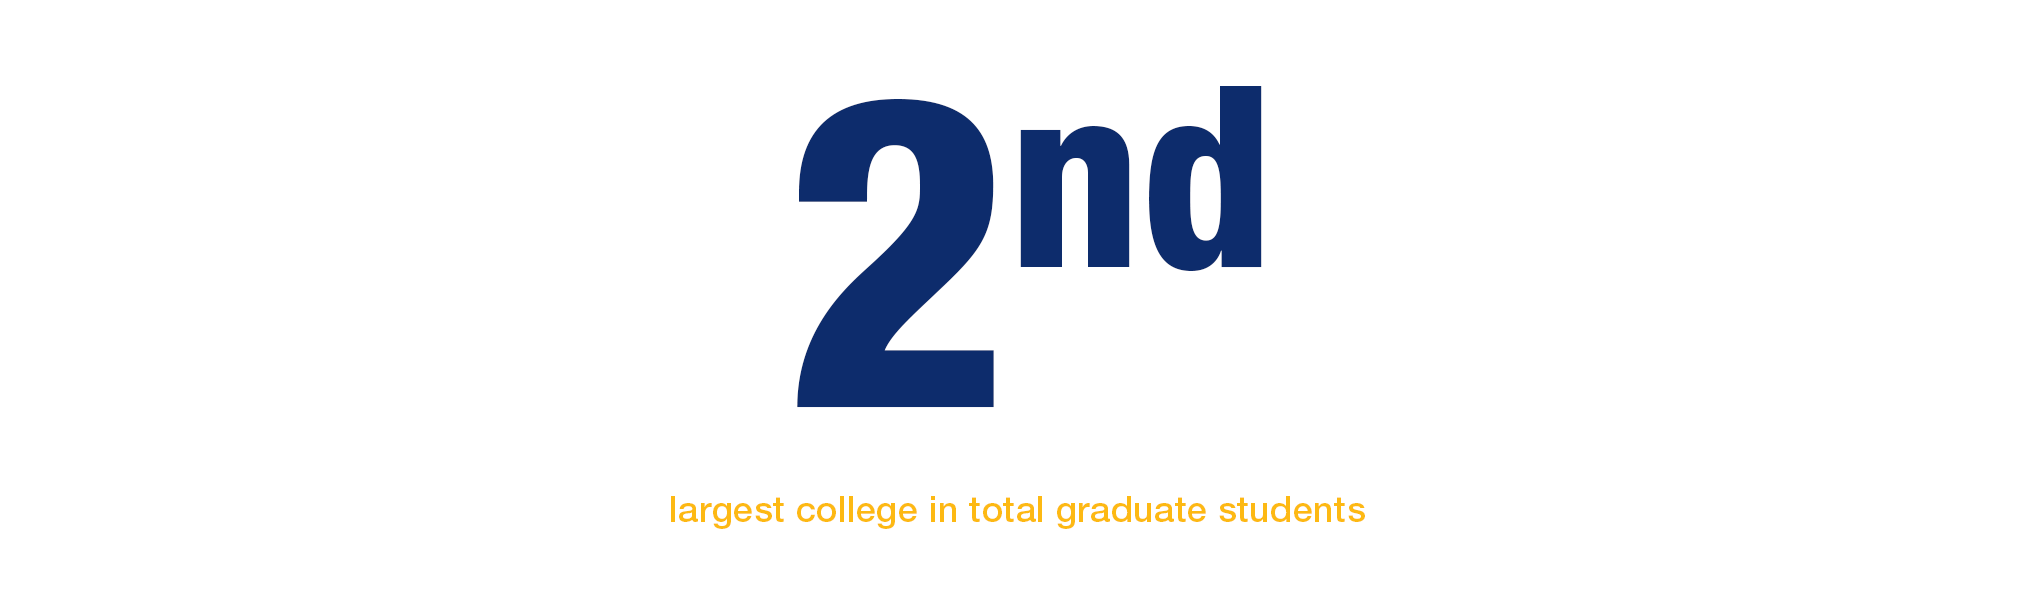 2nd largest college in total graduate students